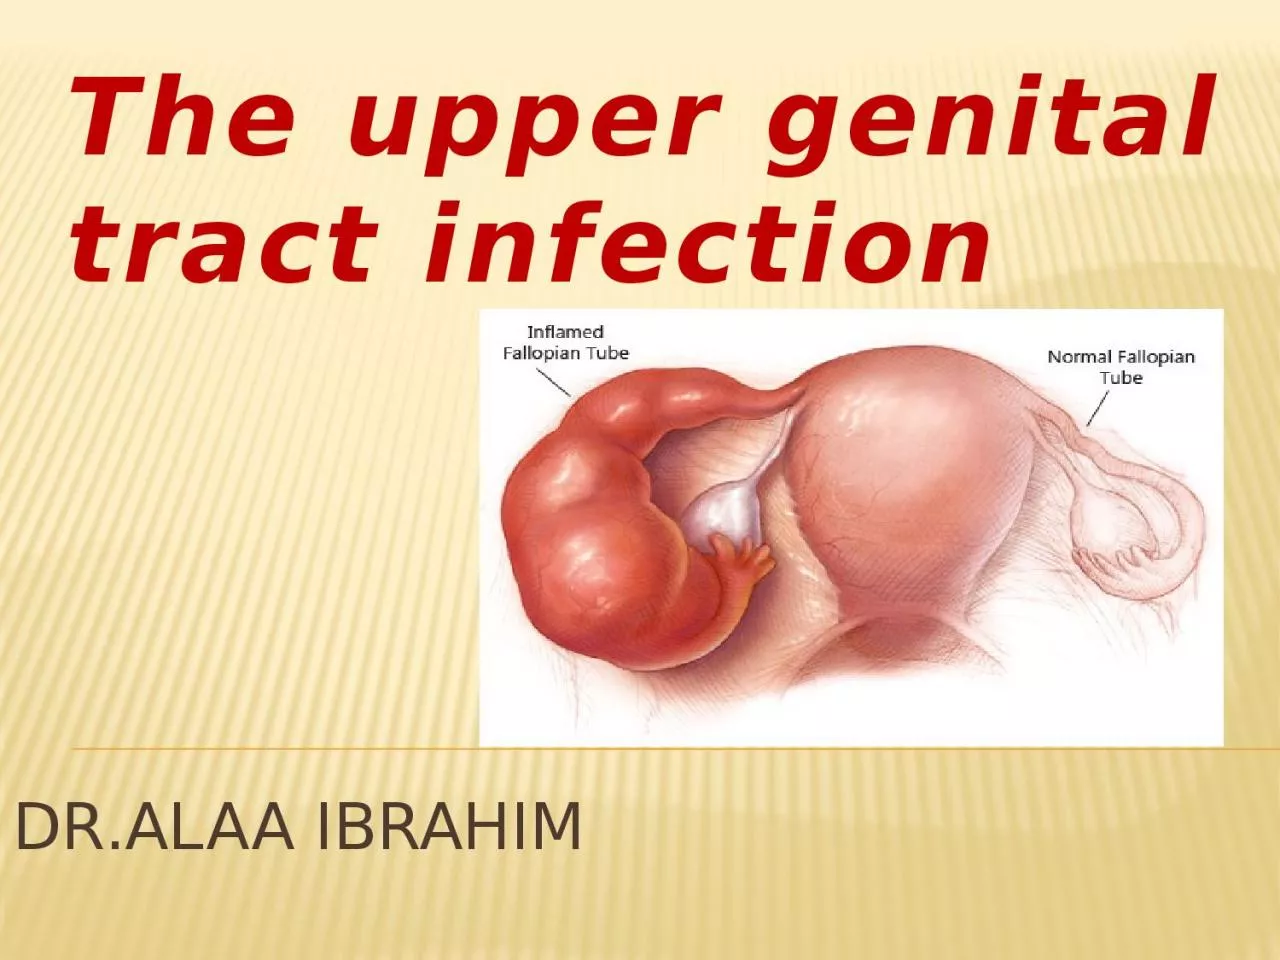 DR.ALAA IBRAHIM The upper genital tract infection